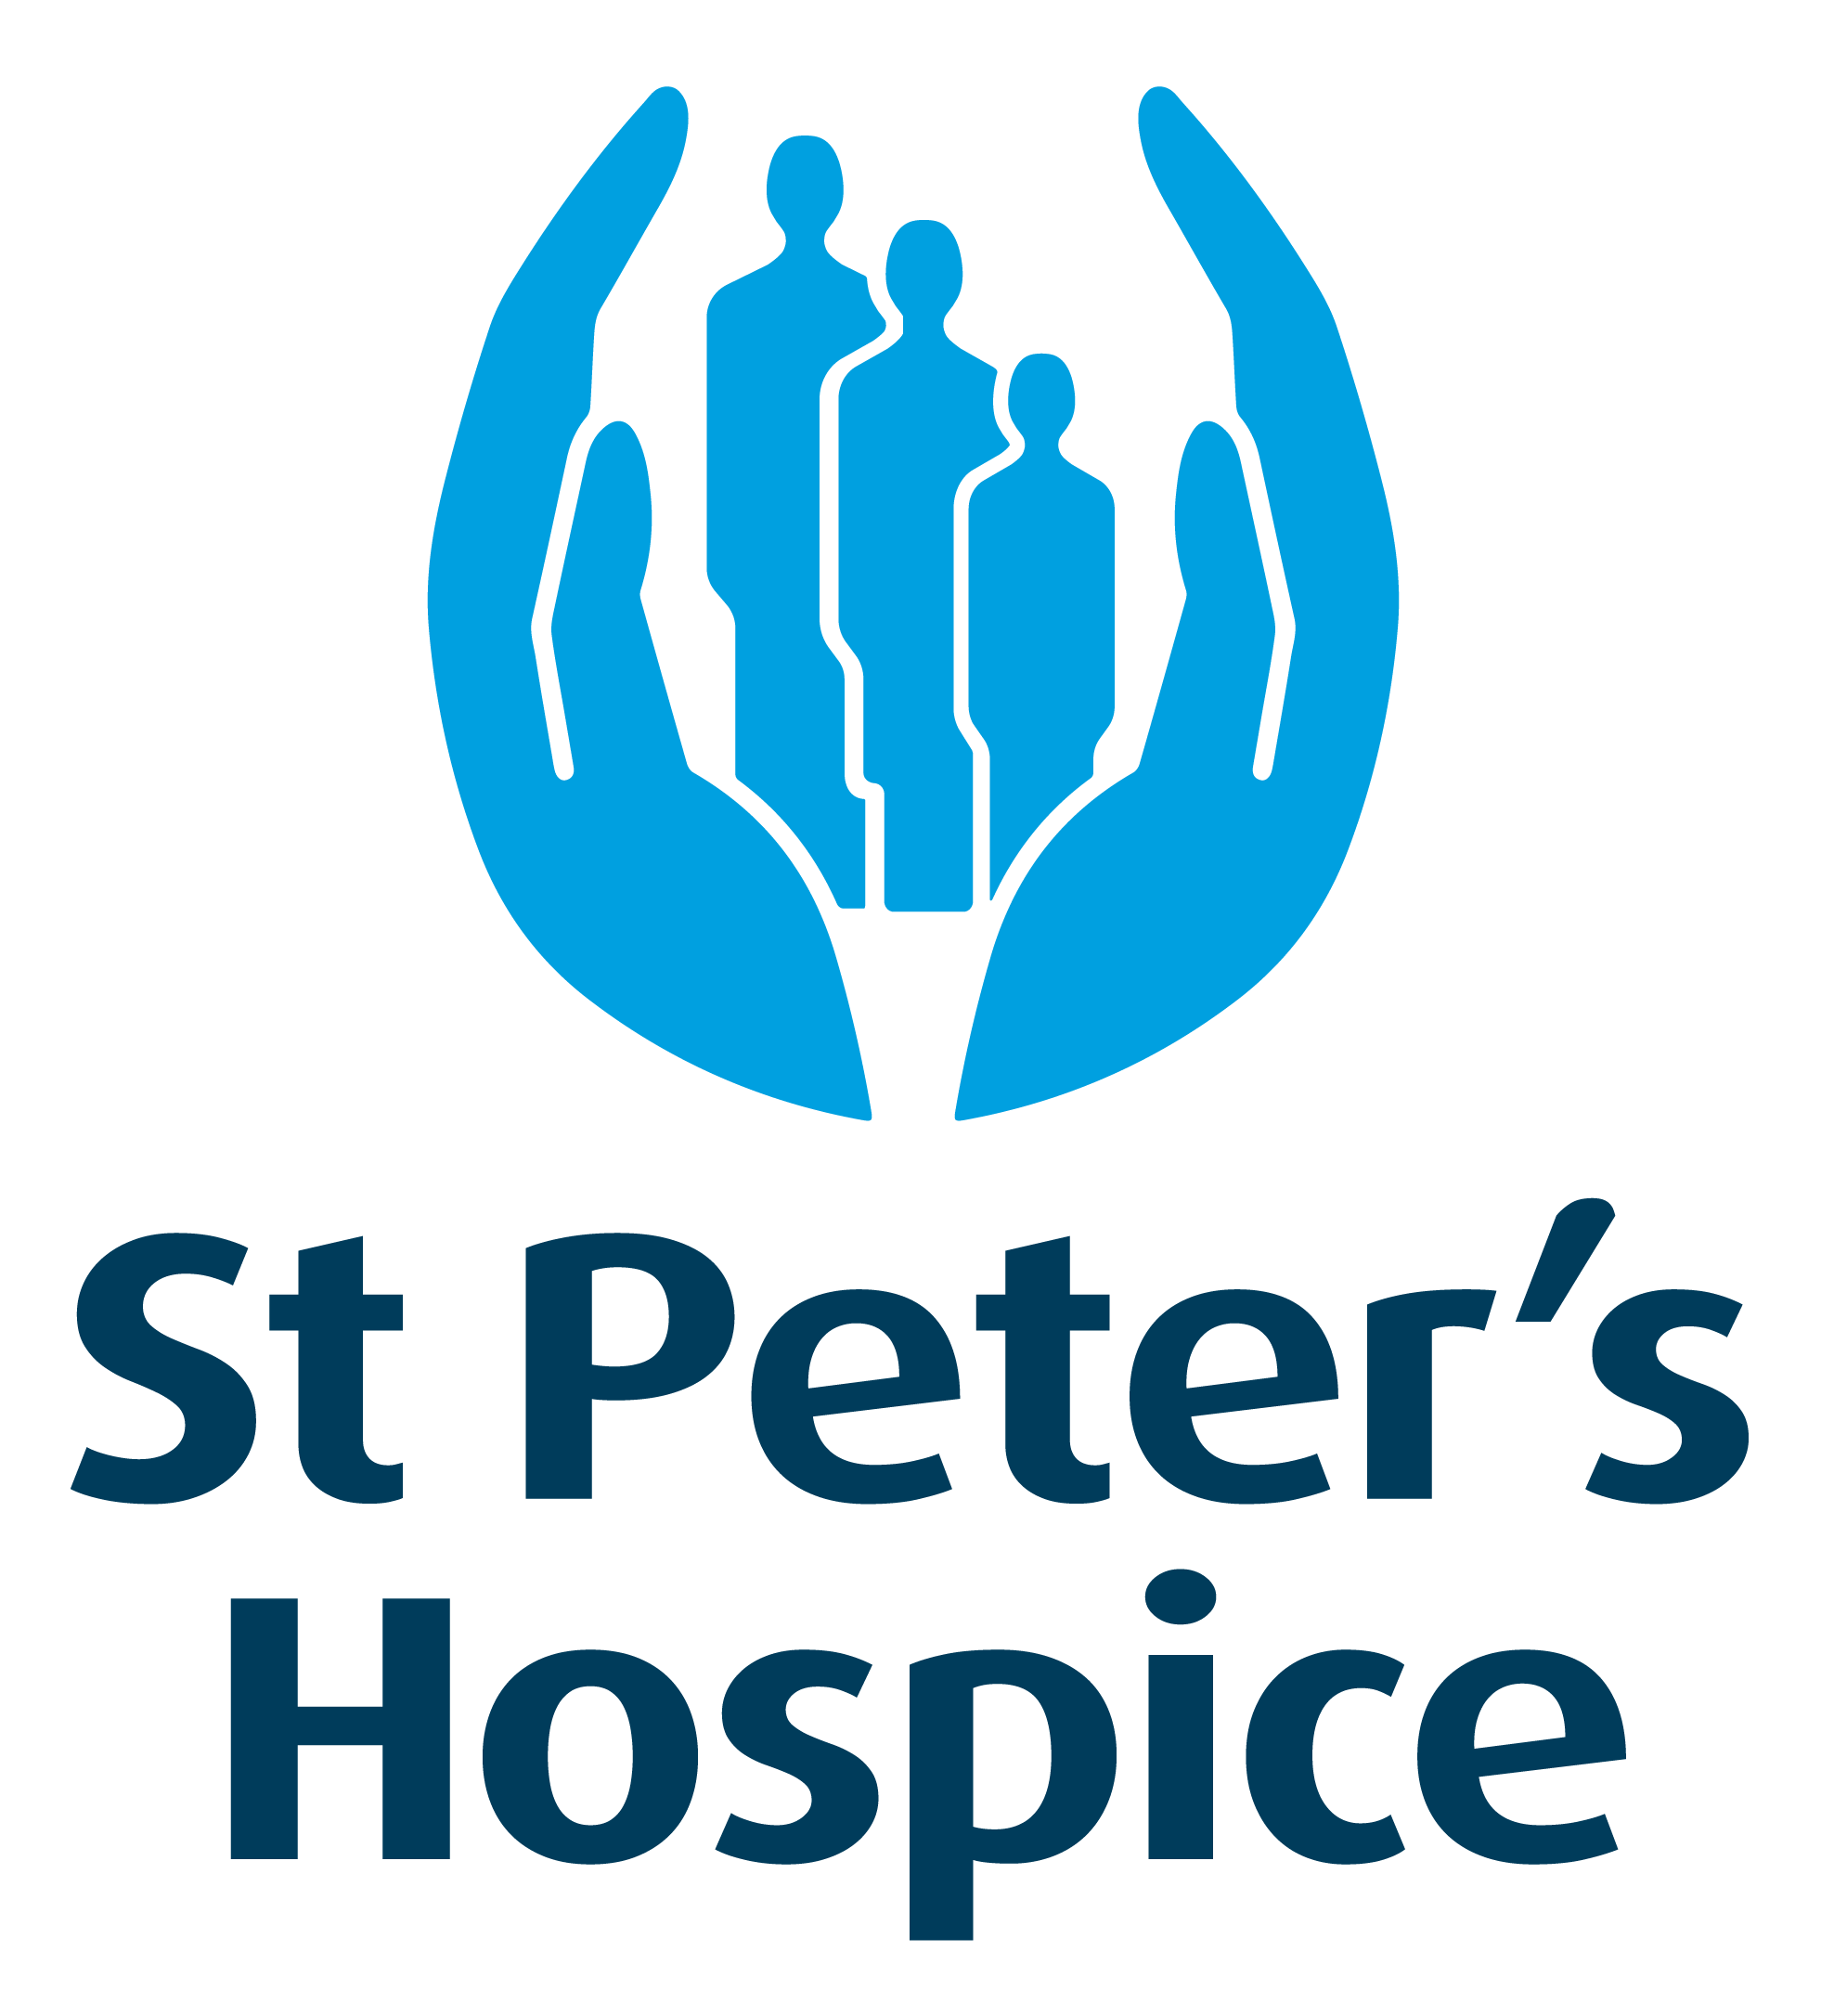 St Peter's Hospice